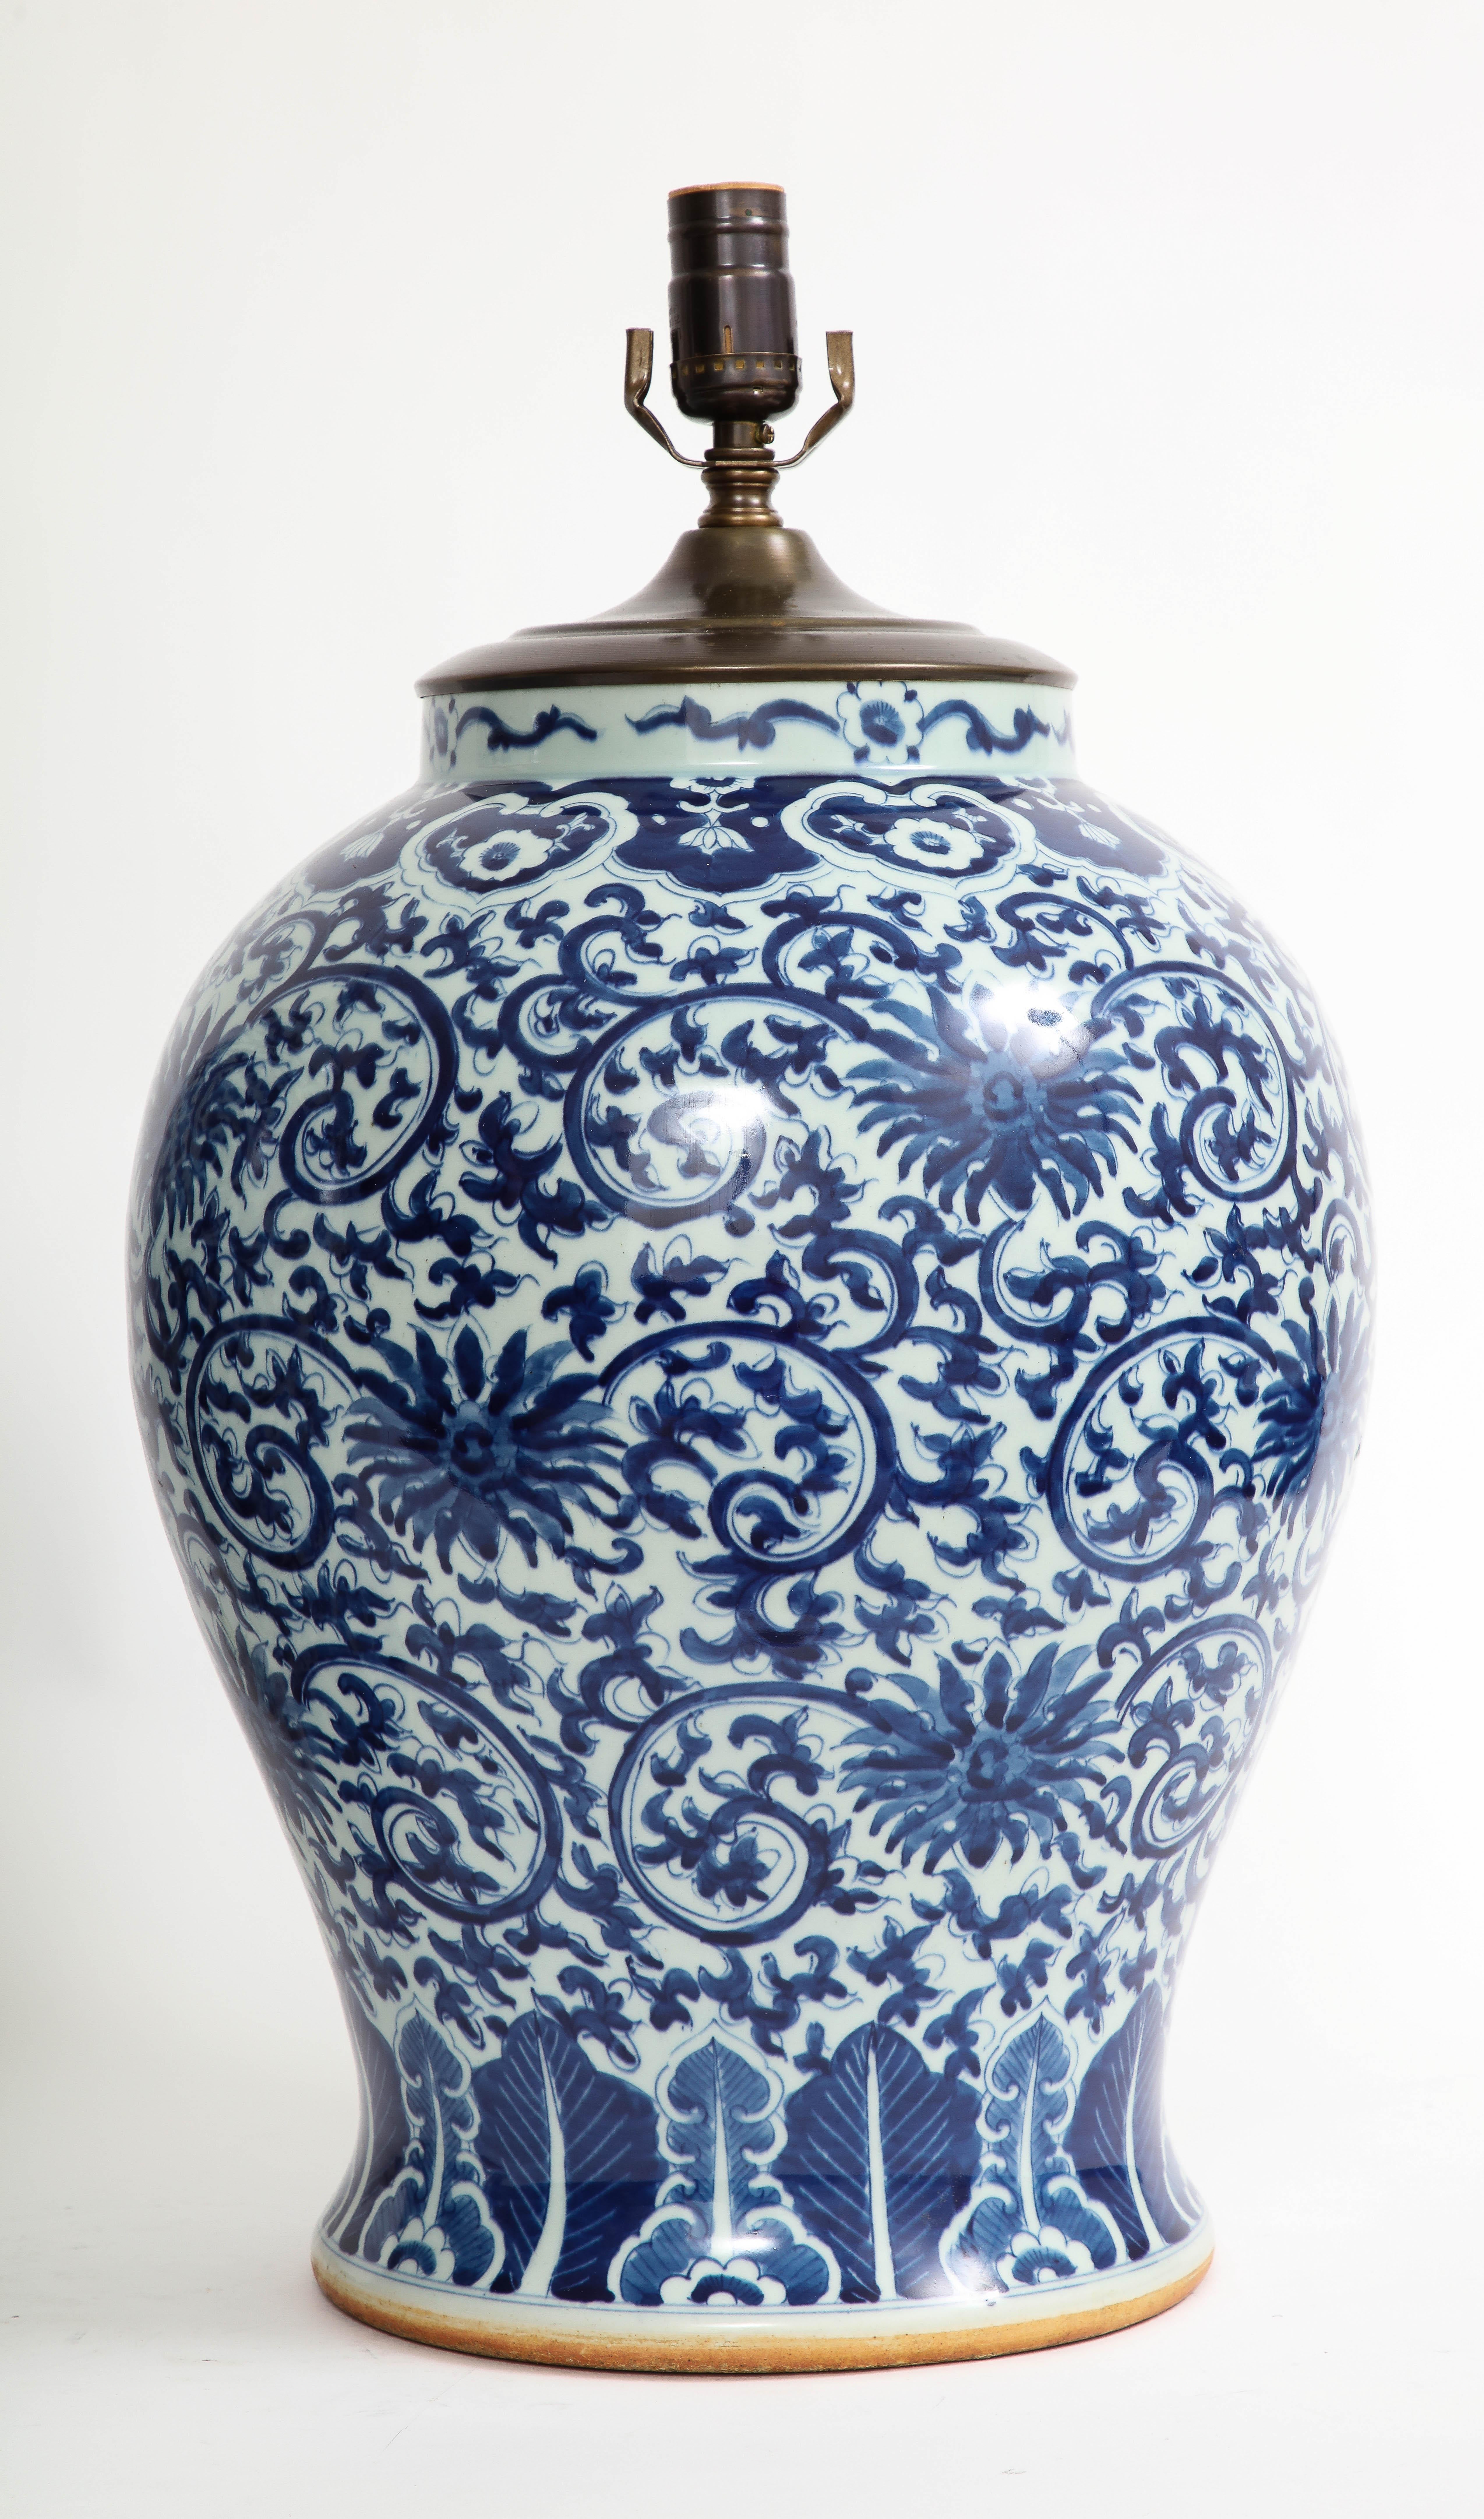 Pair of 19th Century Qing Dynasty Chinese Blue and White Vases Turned to Lamps In Good Condition For Sale In New York, NY